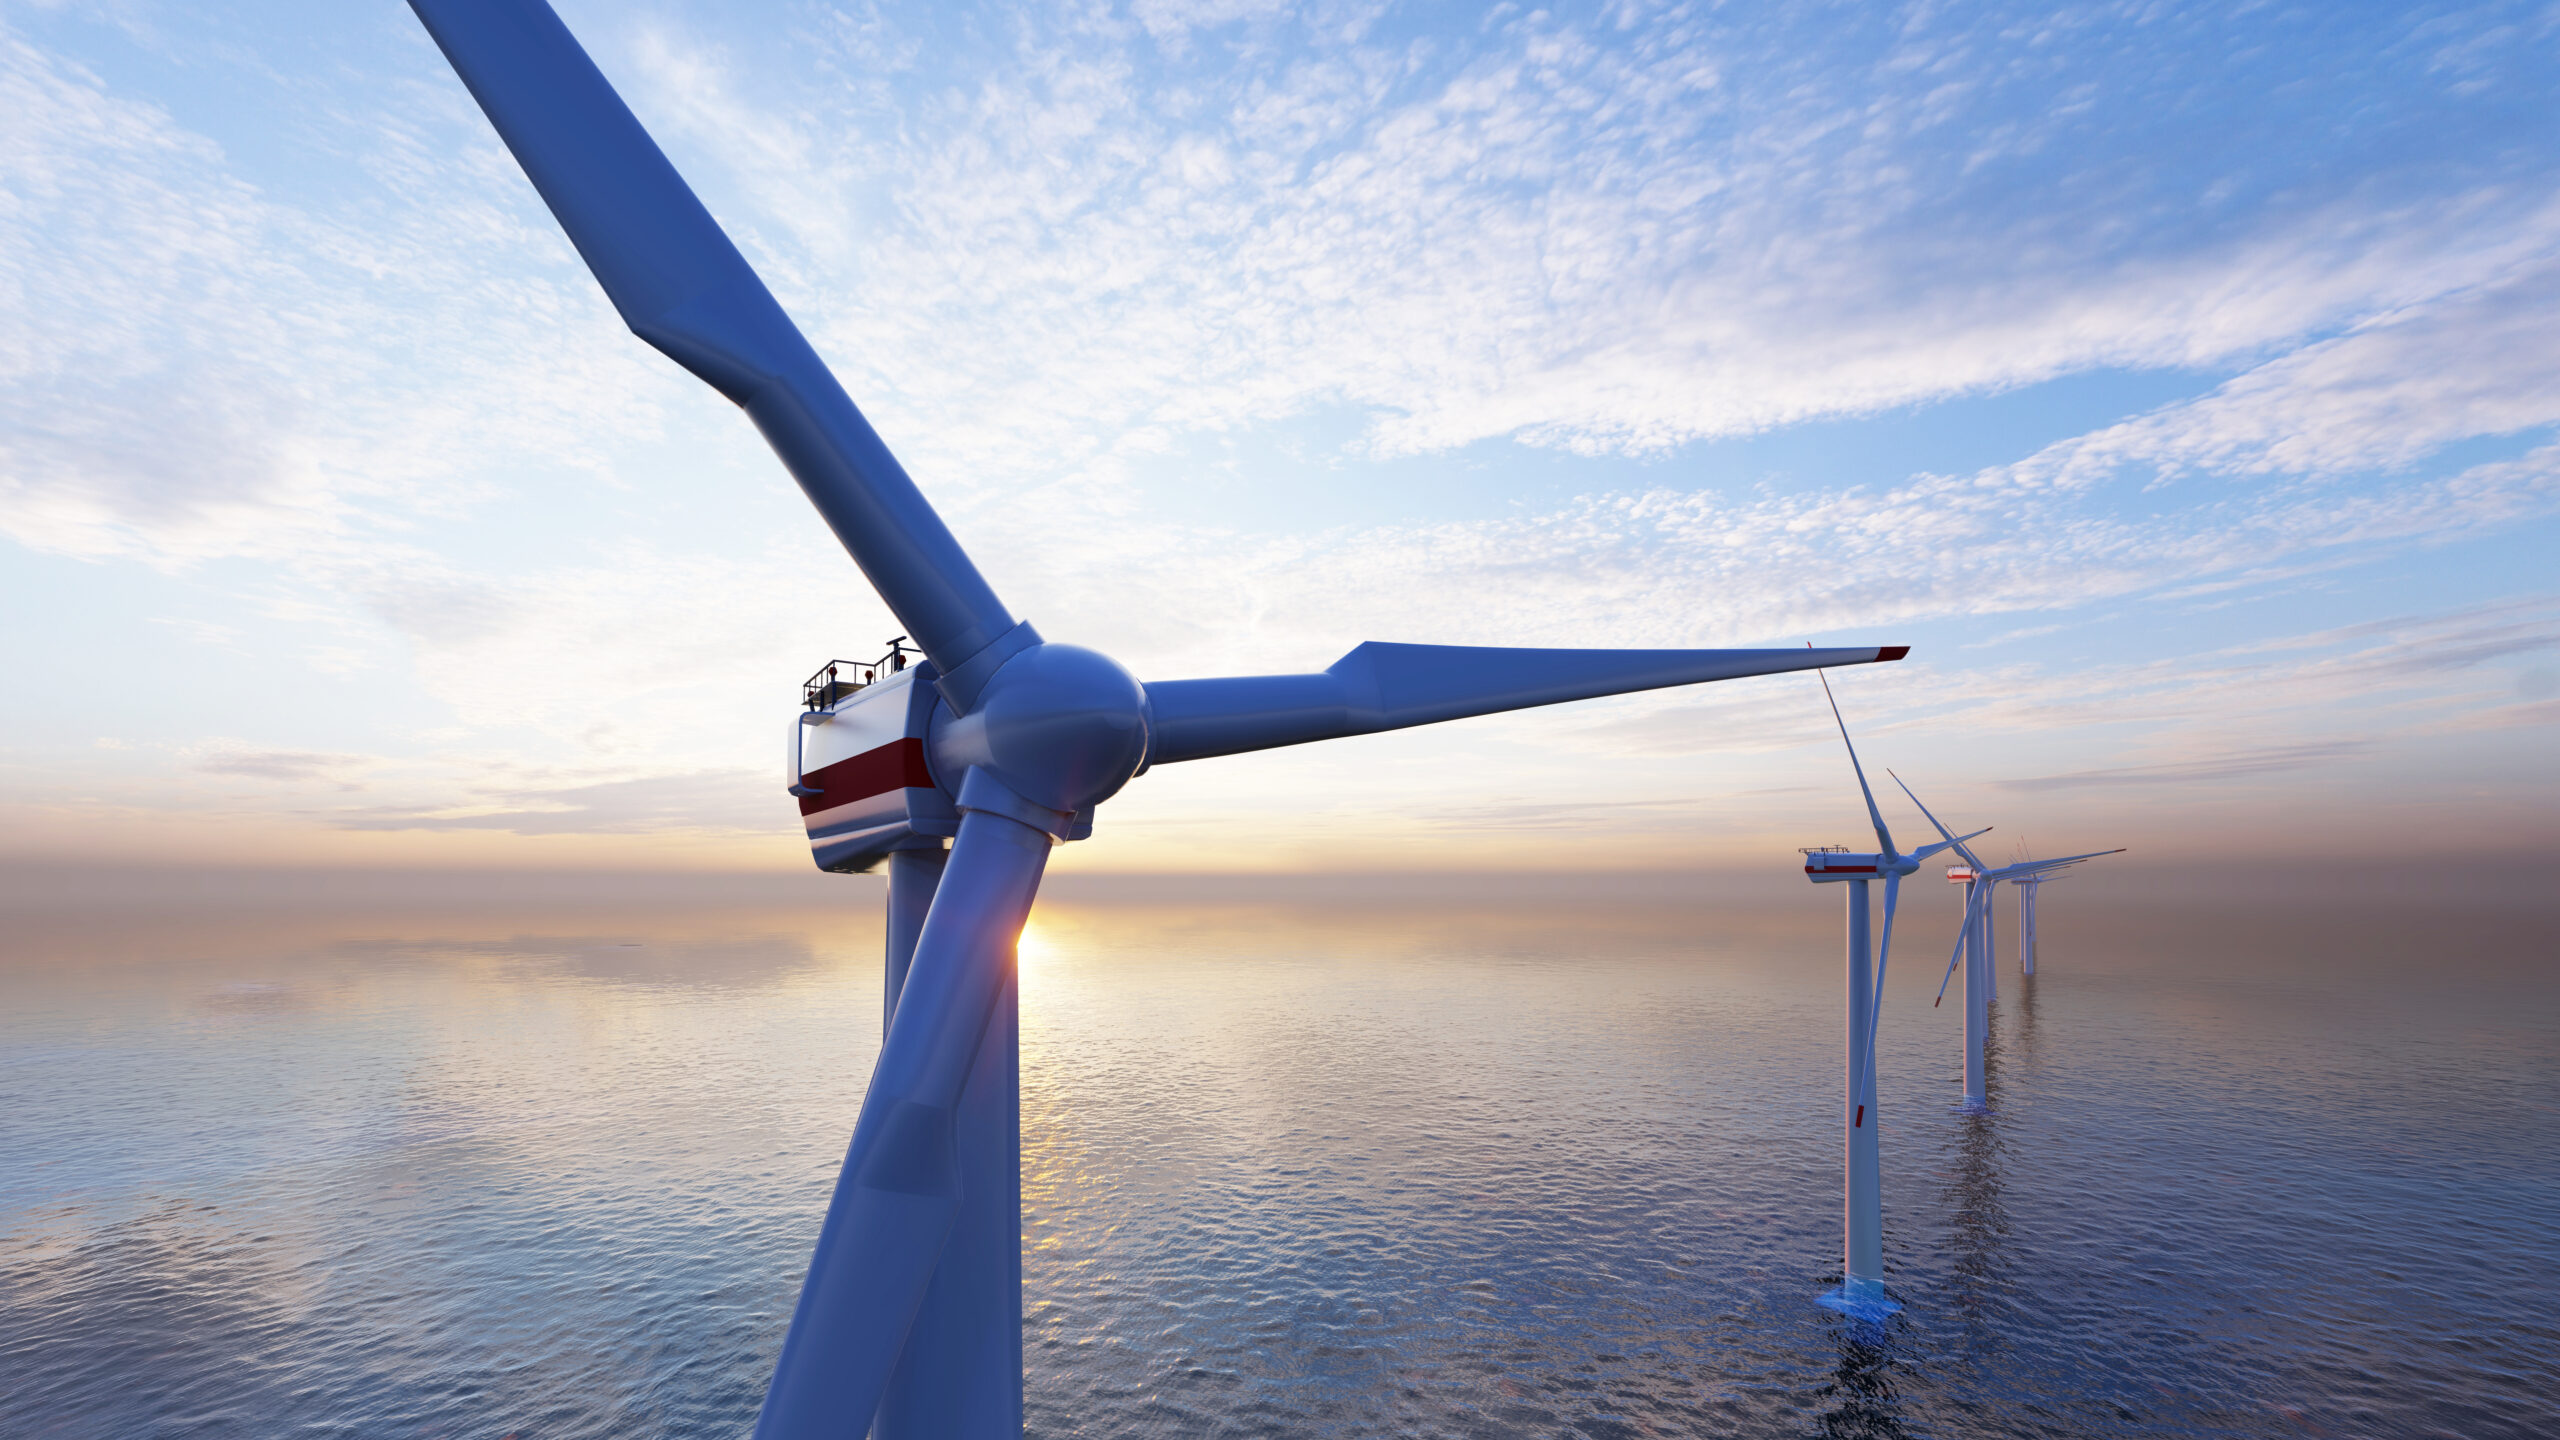 Consortium acts as financial adviser to Ofgem on transfer of offshore wind farm transmission link